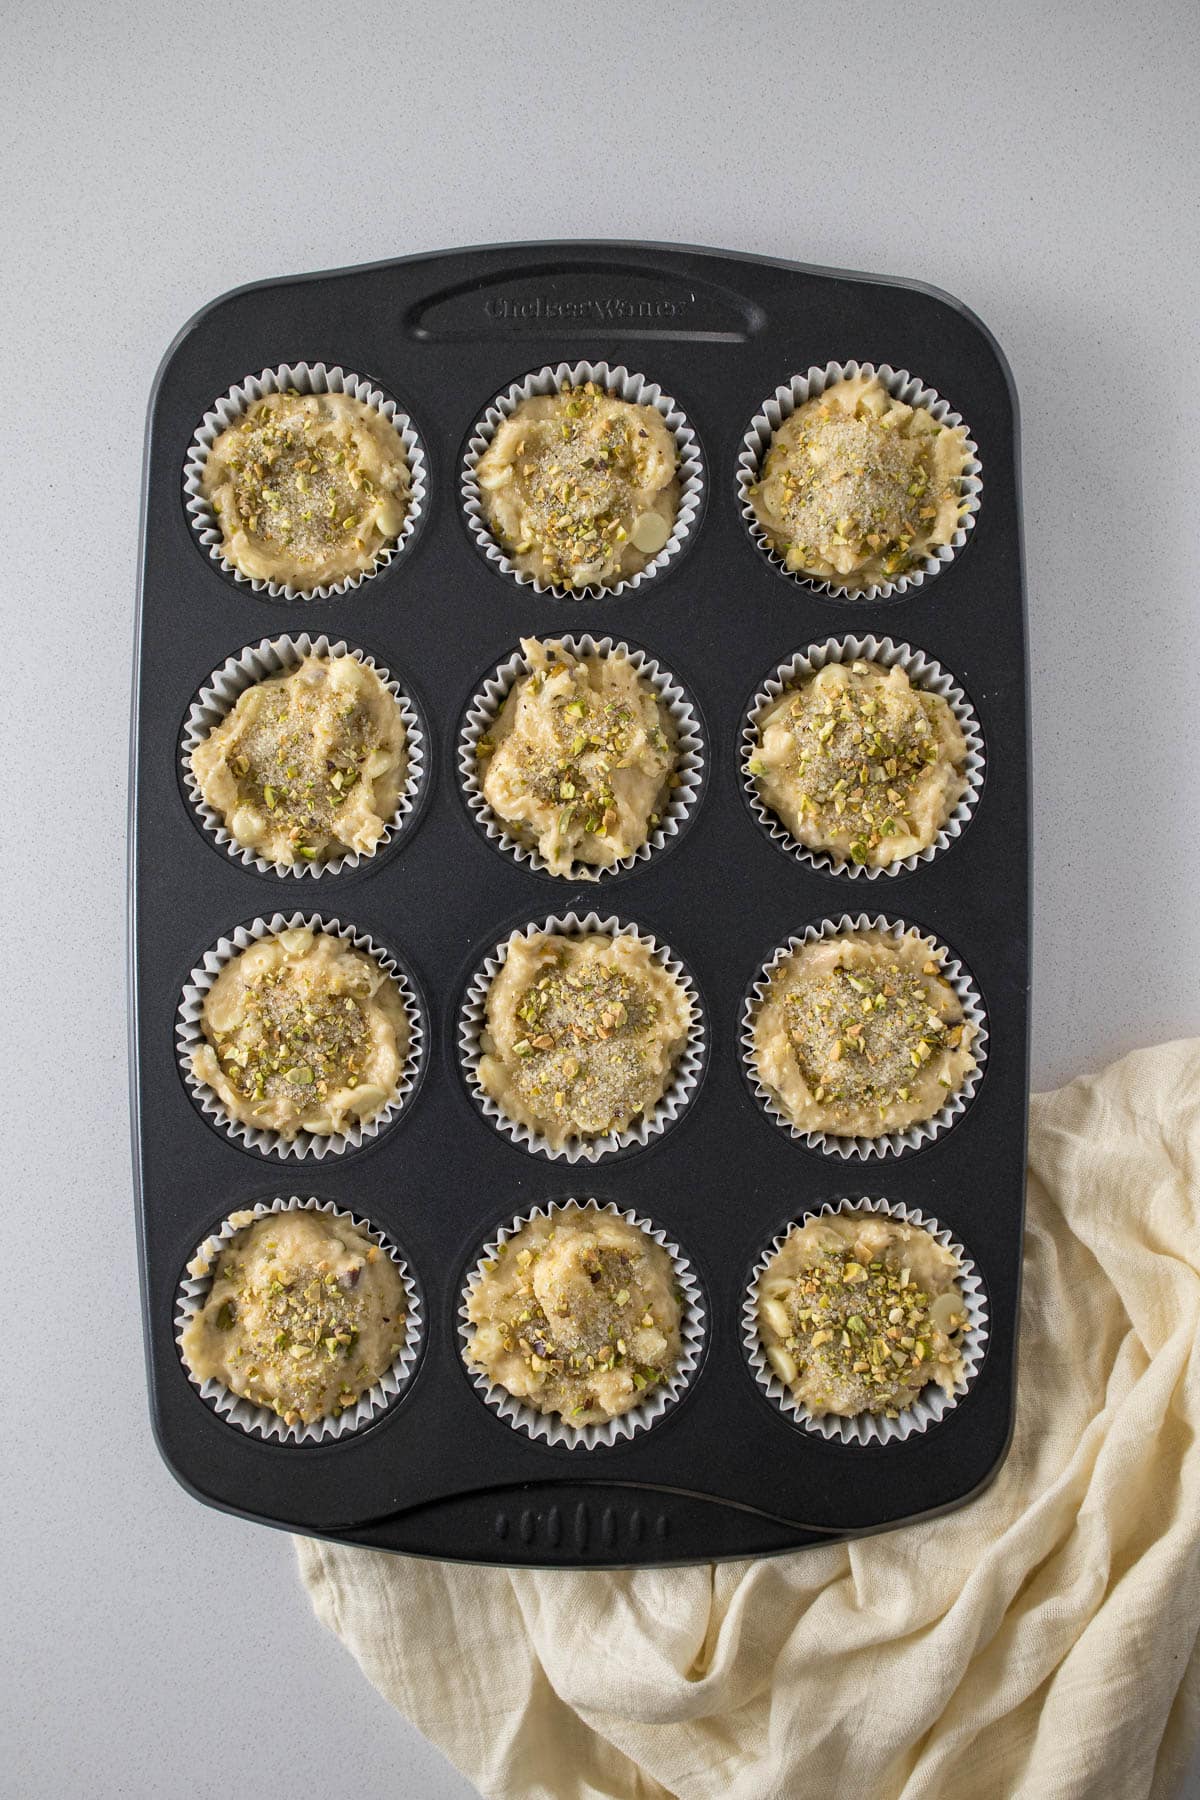 Pistachio muffin batter divided into 12 muffin liners.